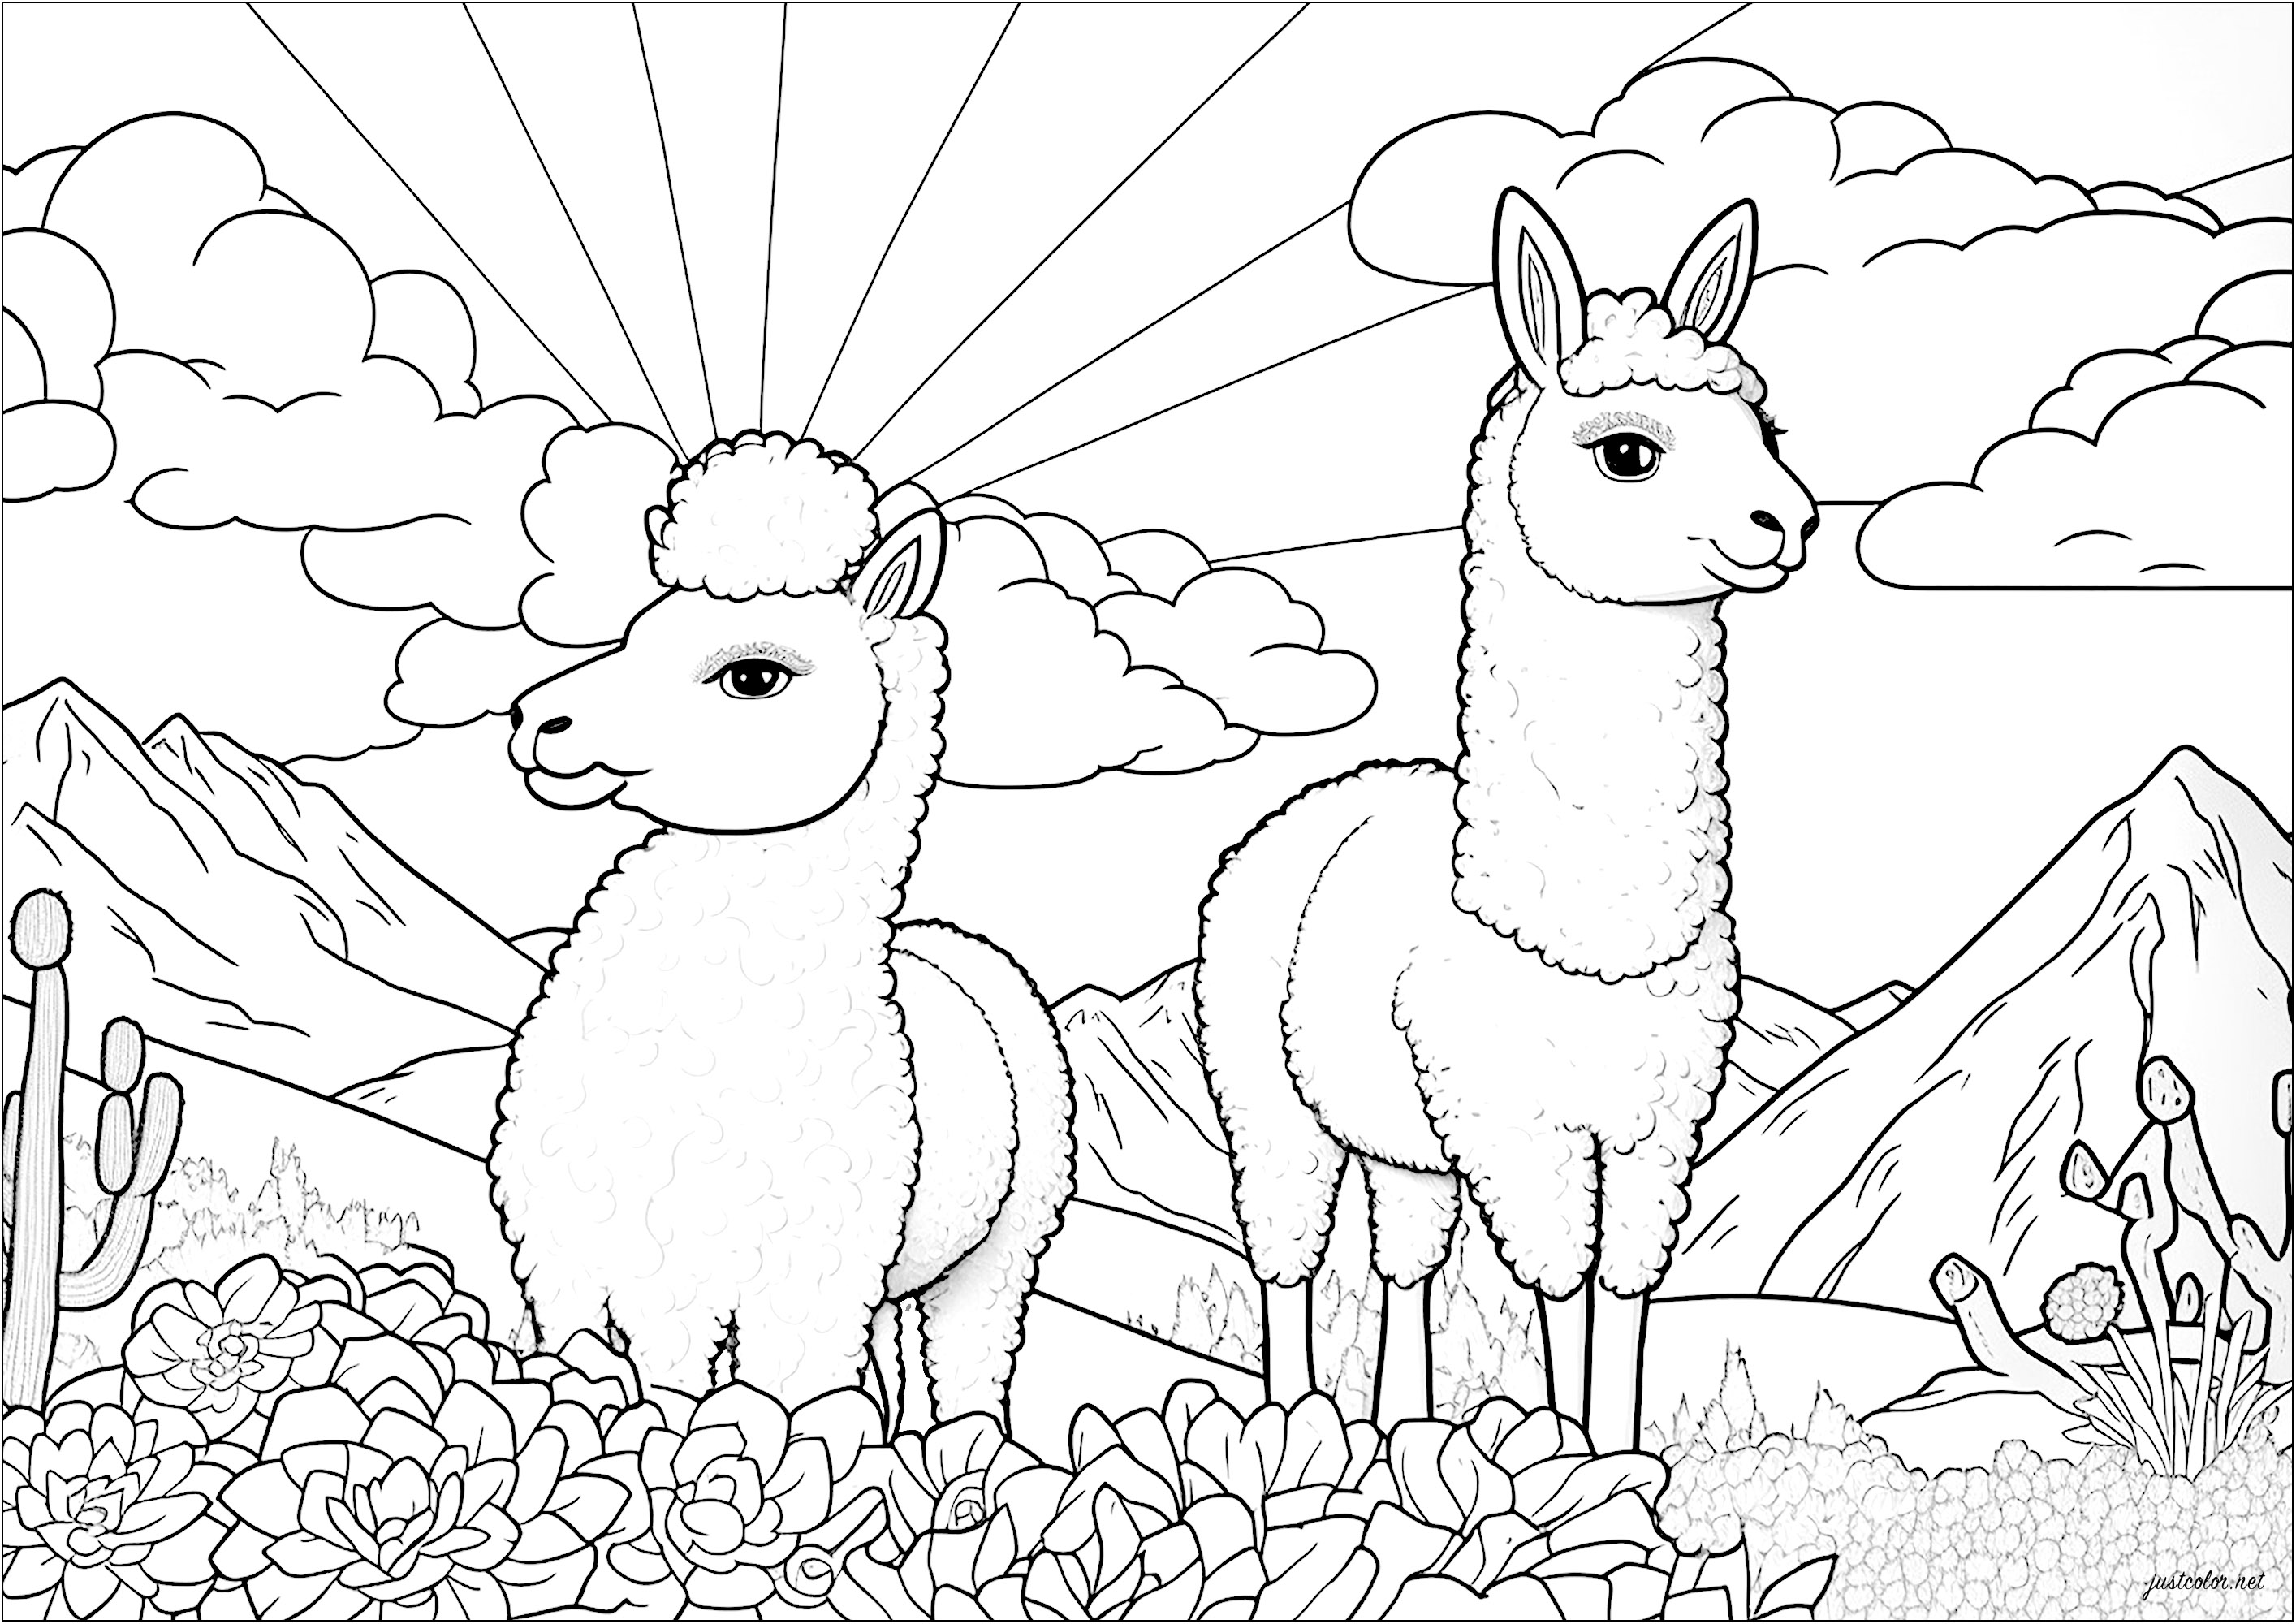 Coloring of two llamas in a field of flowers. These two llamas are looking around, as if they are savoring every moment. This coloring page will delight those who want to escape to a quieter, gentler world.